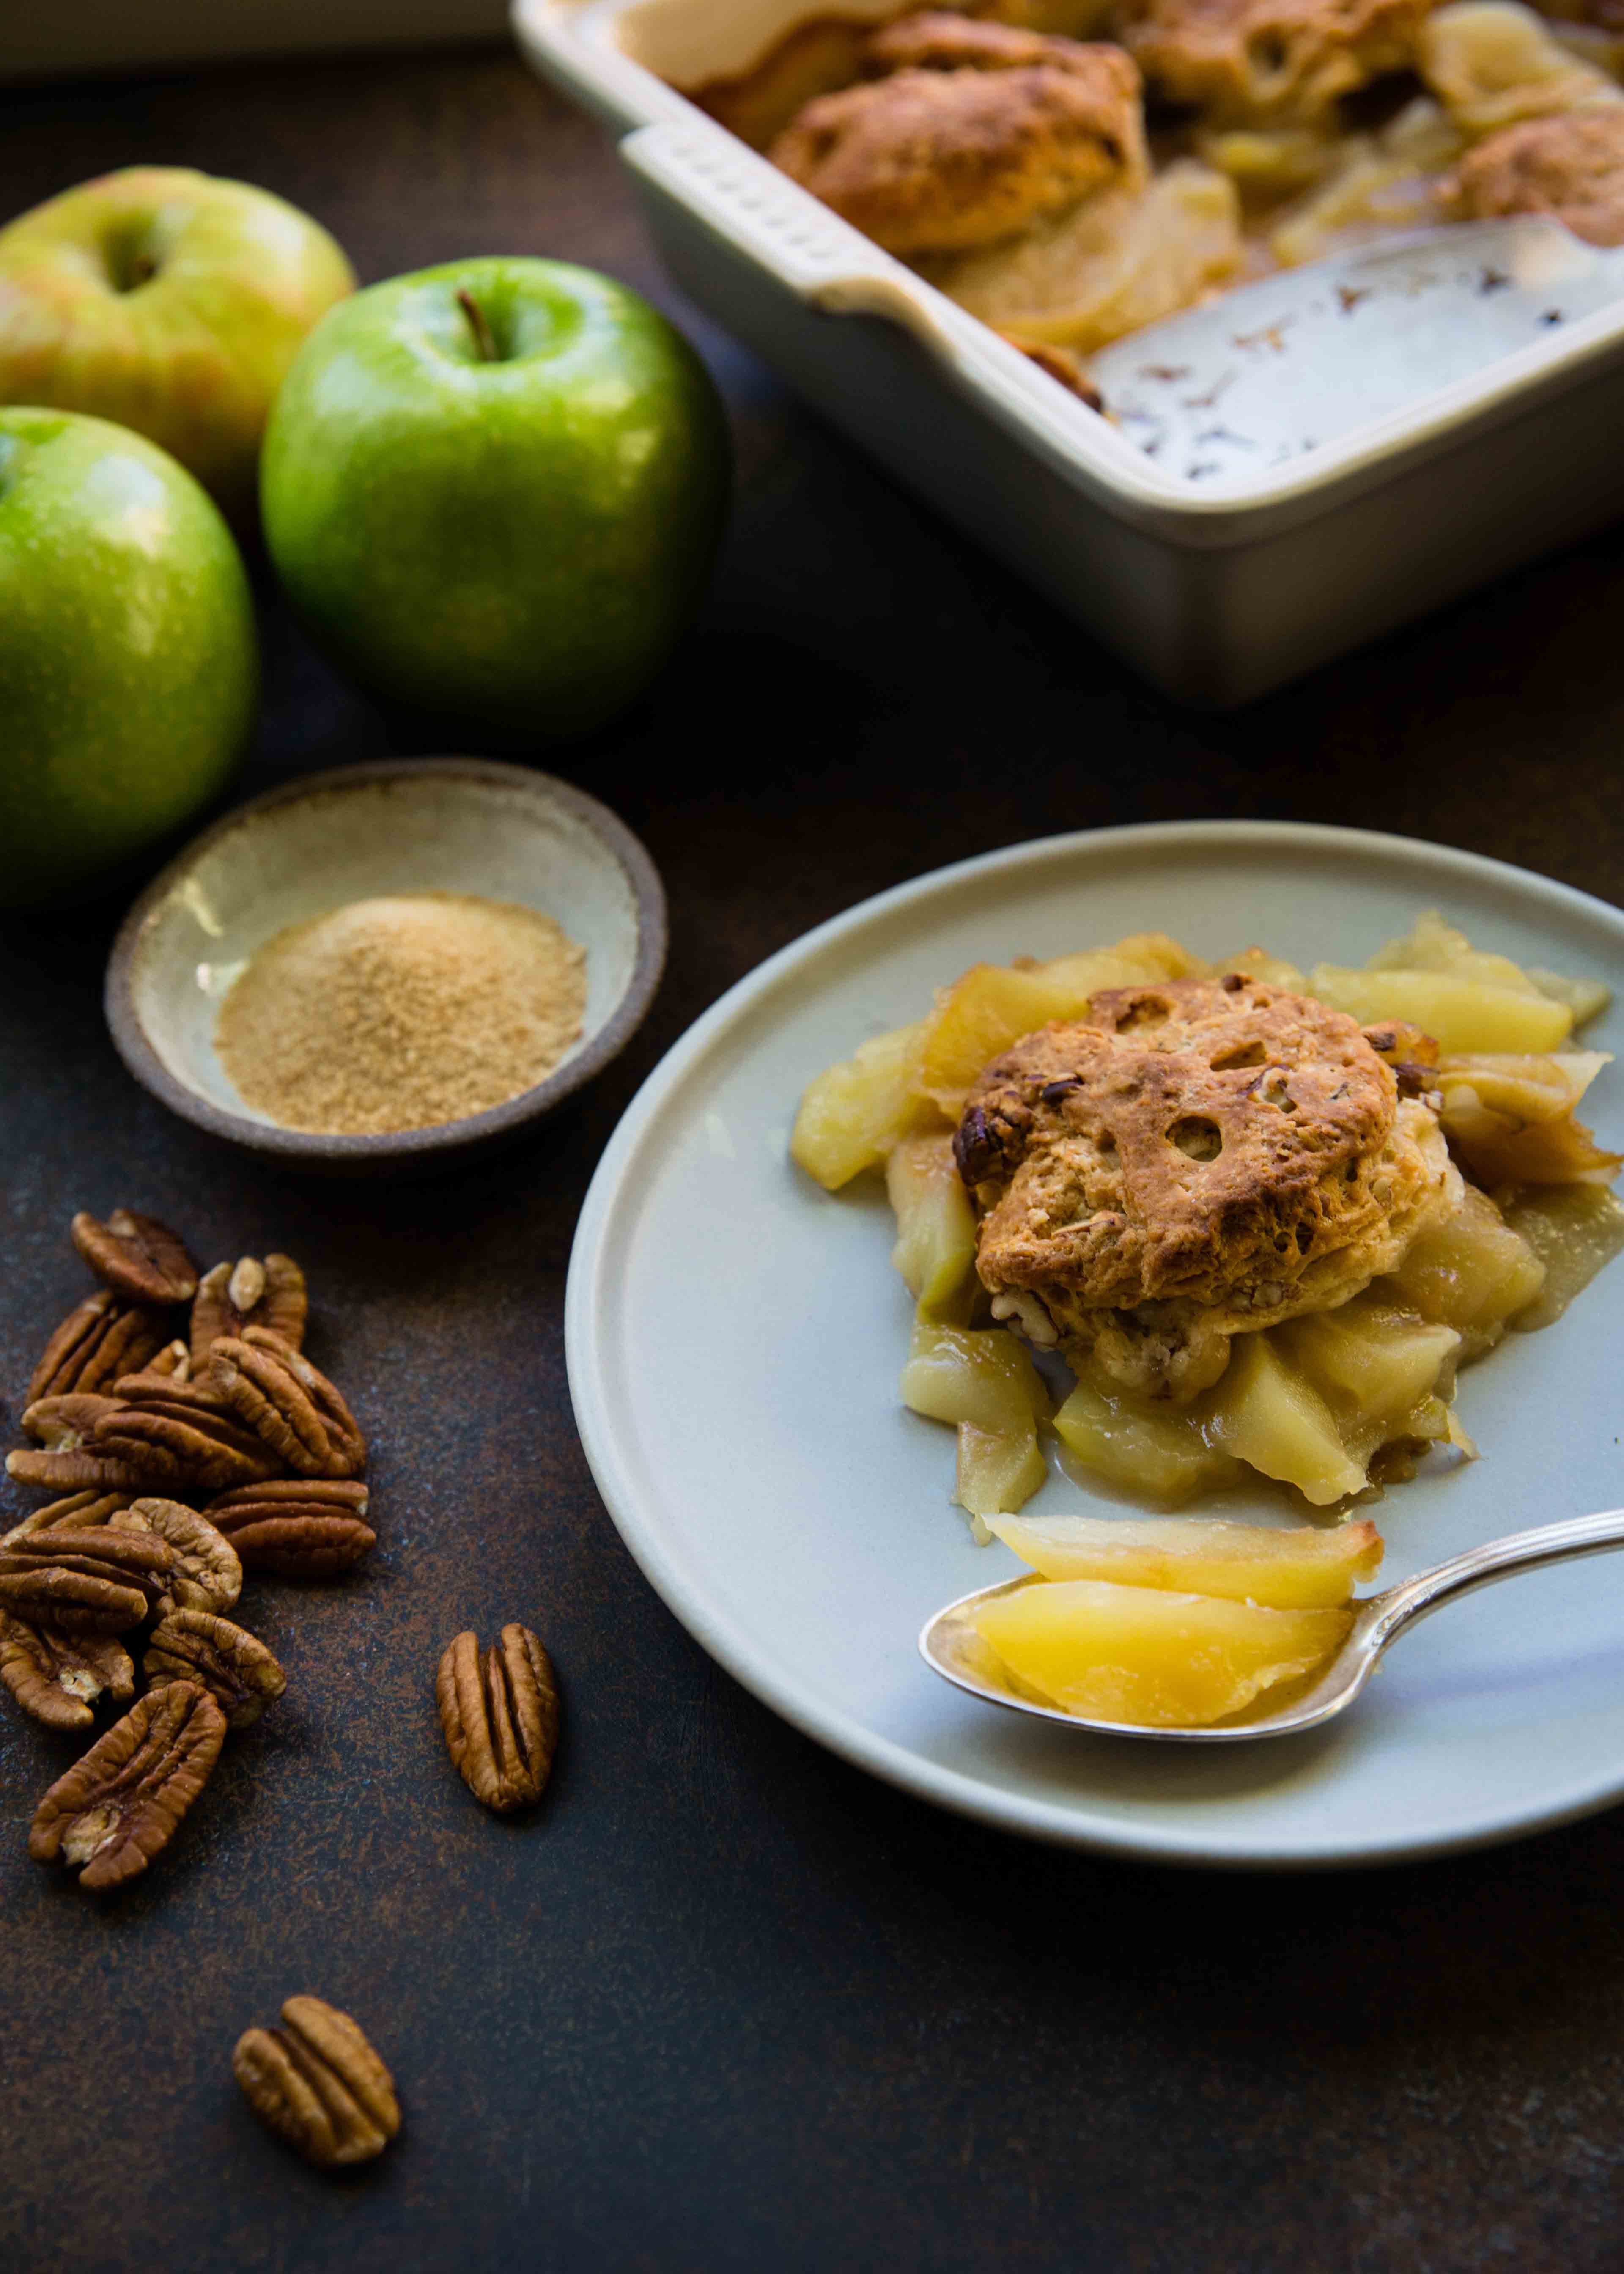 Maple sugar and spice and everything nice (like apples and pecans). Making an Apple Maple Pecan cobbler is an easy dessert to bake for a warming dessert.